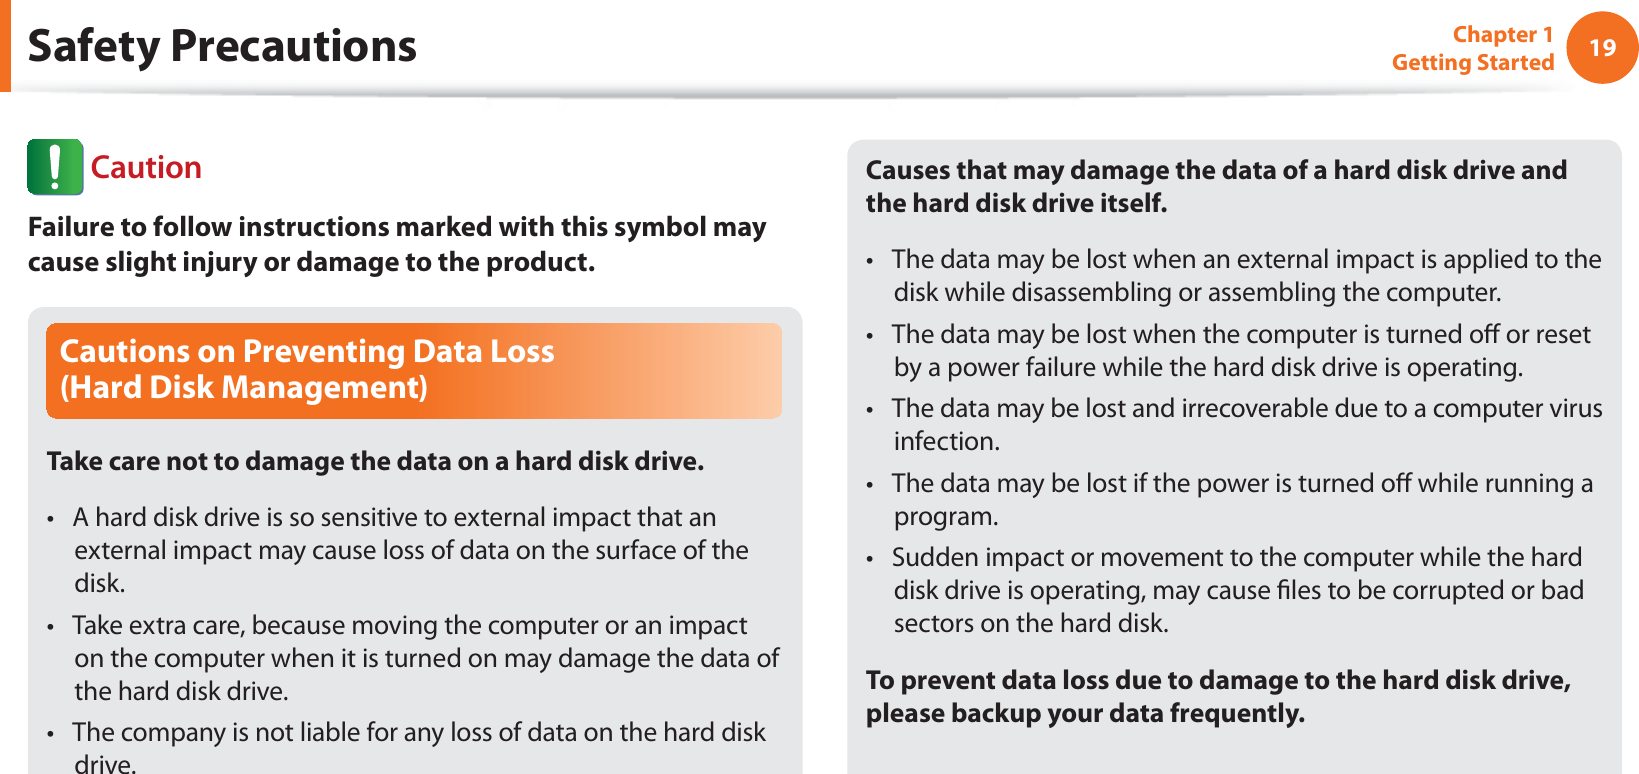 19Chapter 1 Getting StartedCautions on Preventing Data Loss  (Hard Disk Management)Take care not to damage the data on a hard disk drive.A hard disk drive is so sensitive to external impact that an t external impact may cause loss of data on the surface of the disk.Take extra care, because moving the computer or an impact t on the computer when it is turned on may damage the data of the hard disk drive.The company is not liable for any loss of data on the hard disk t drive.Causes that may damage the data of a hard disk drive and the hard disk drive itself.The data may be lost when an external impact is applied to the t disk while disassembling or assembling the computer.The data may be lost when the computer is turned o or reset t by a power failure while the hard disk drive is operating.The data may be lost and irrecoverable due to a computer virus t infection.The data may be lost if the power is turned o while running a t program.Sudden impact or movement to the computer while the hard t disk drive is operating, may cause les to be corrupted or bad sectors on the hard disk.To prevent data loss due to damage to the hard disk drive, please backup your data frequently.Safety Precautions CautionFailure to follow instructions marked with this symbol may cause slight injury or damage to the product.